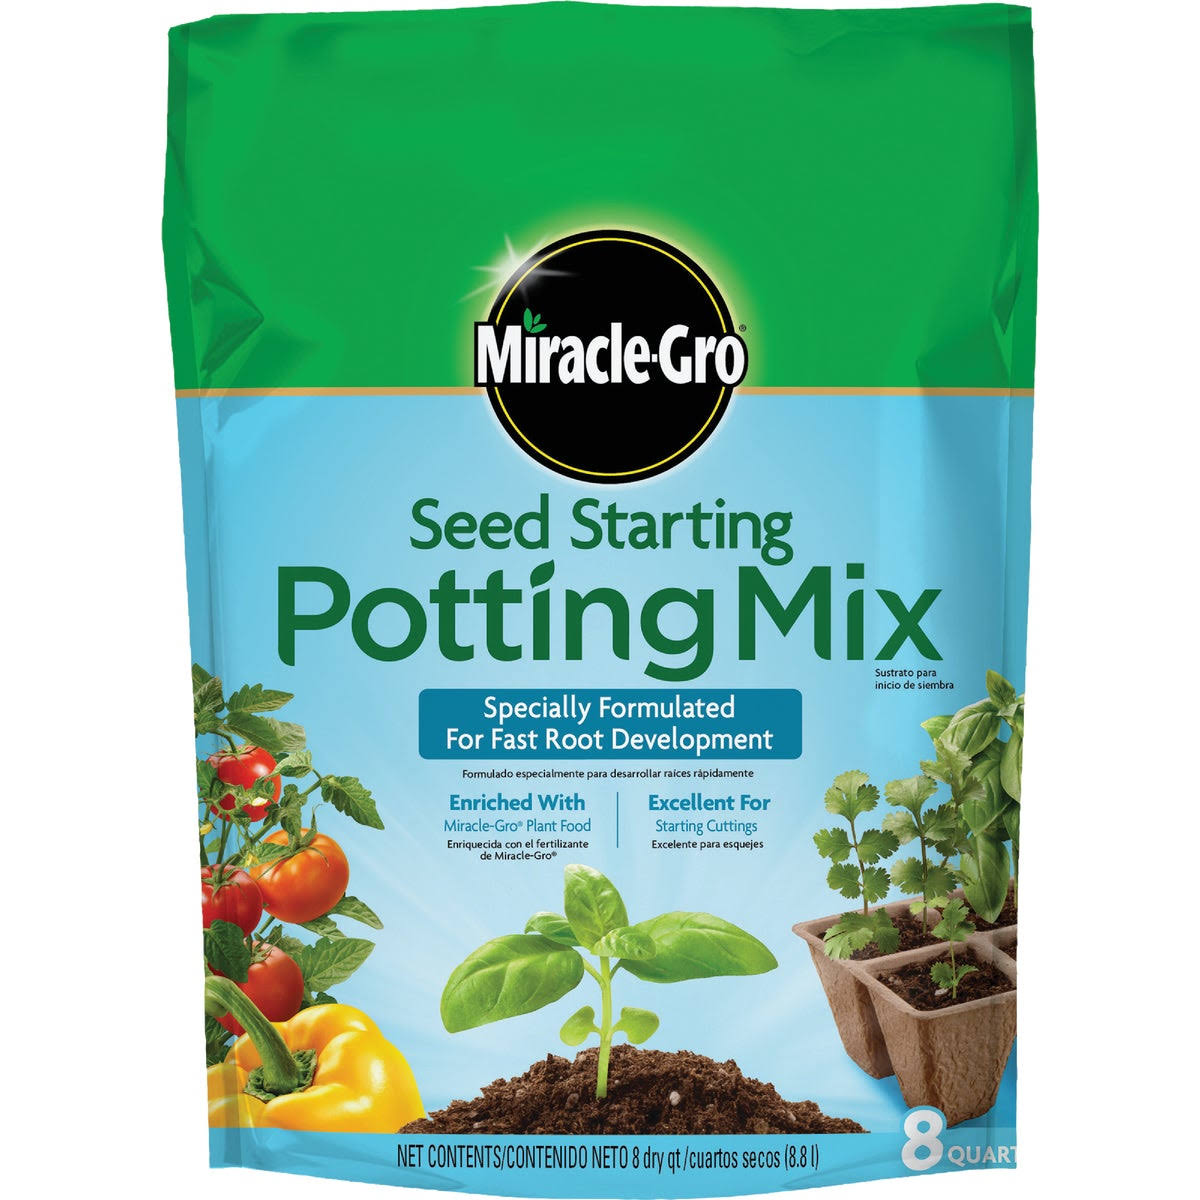 Scotts Lawn Care Miracle Gro Seed Starting Potting Mix - 8 Qt